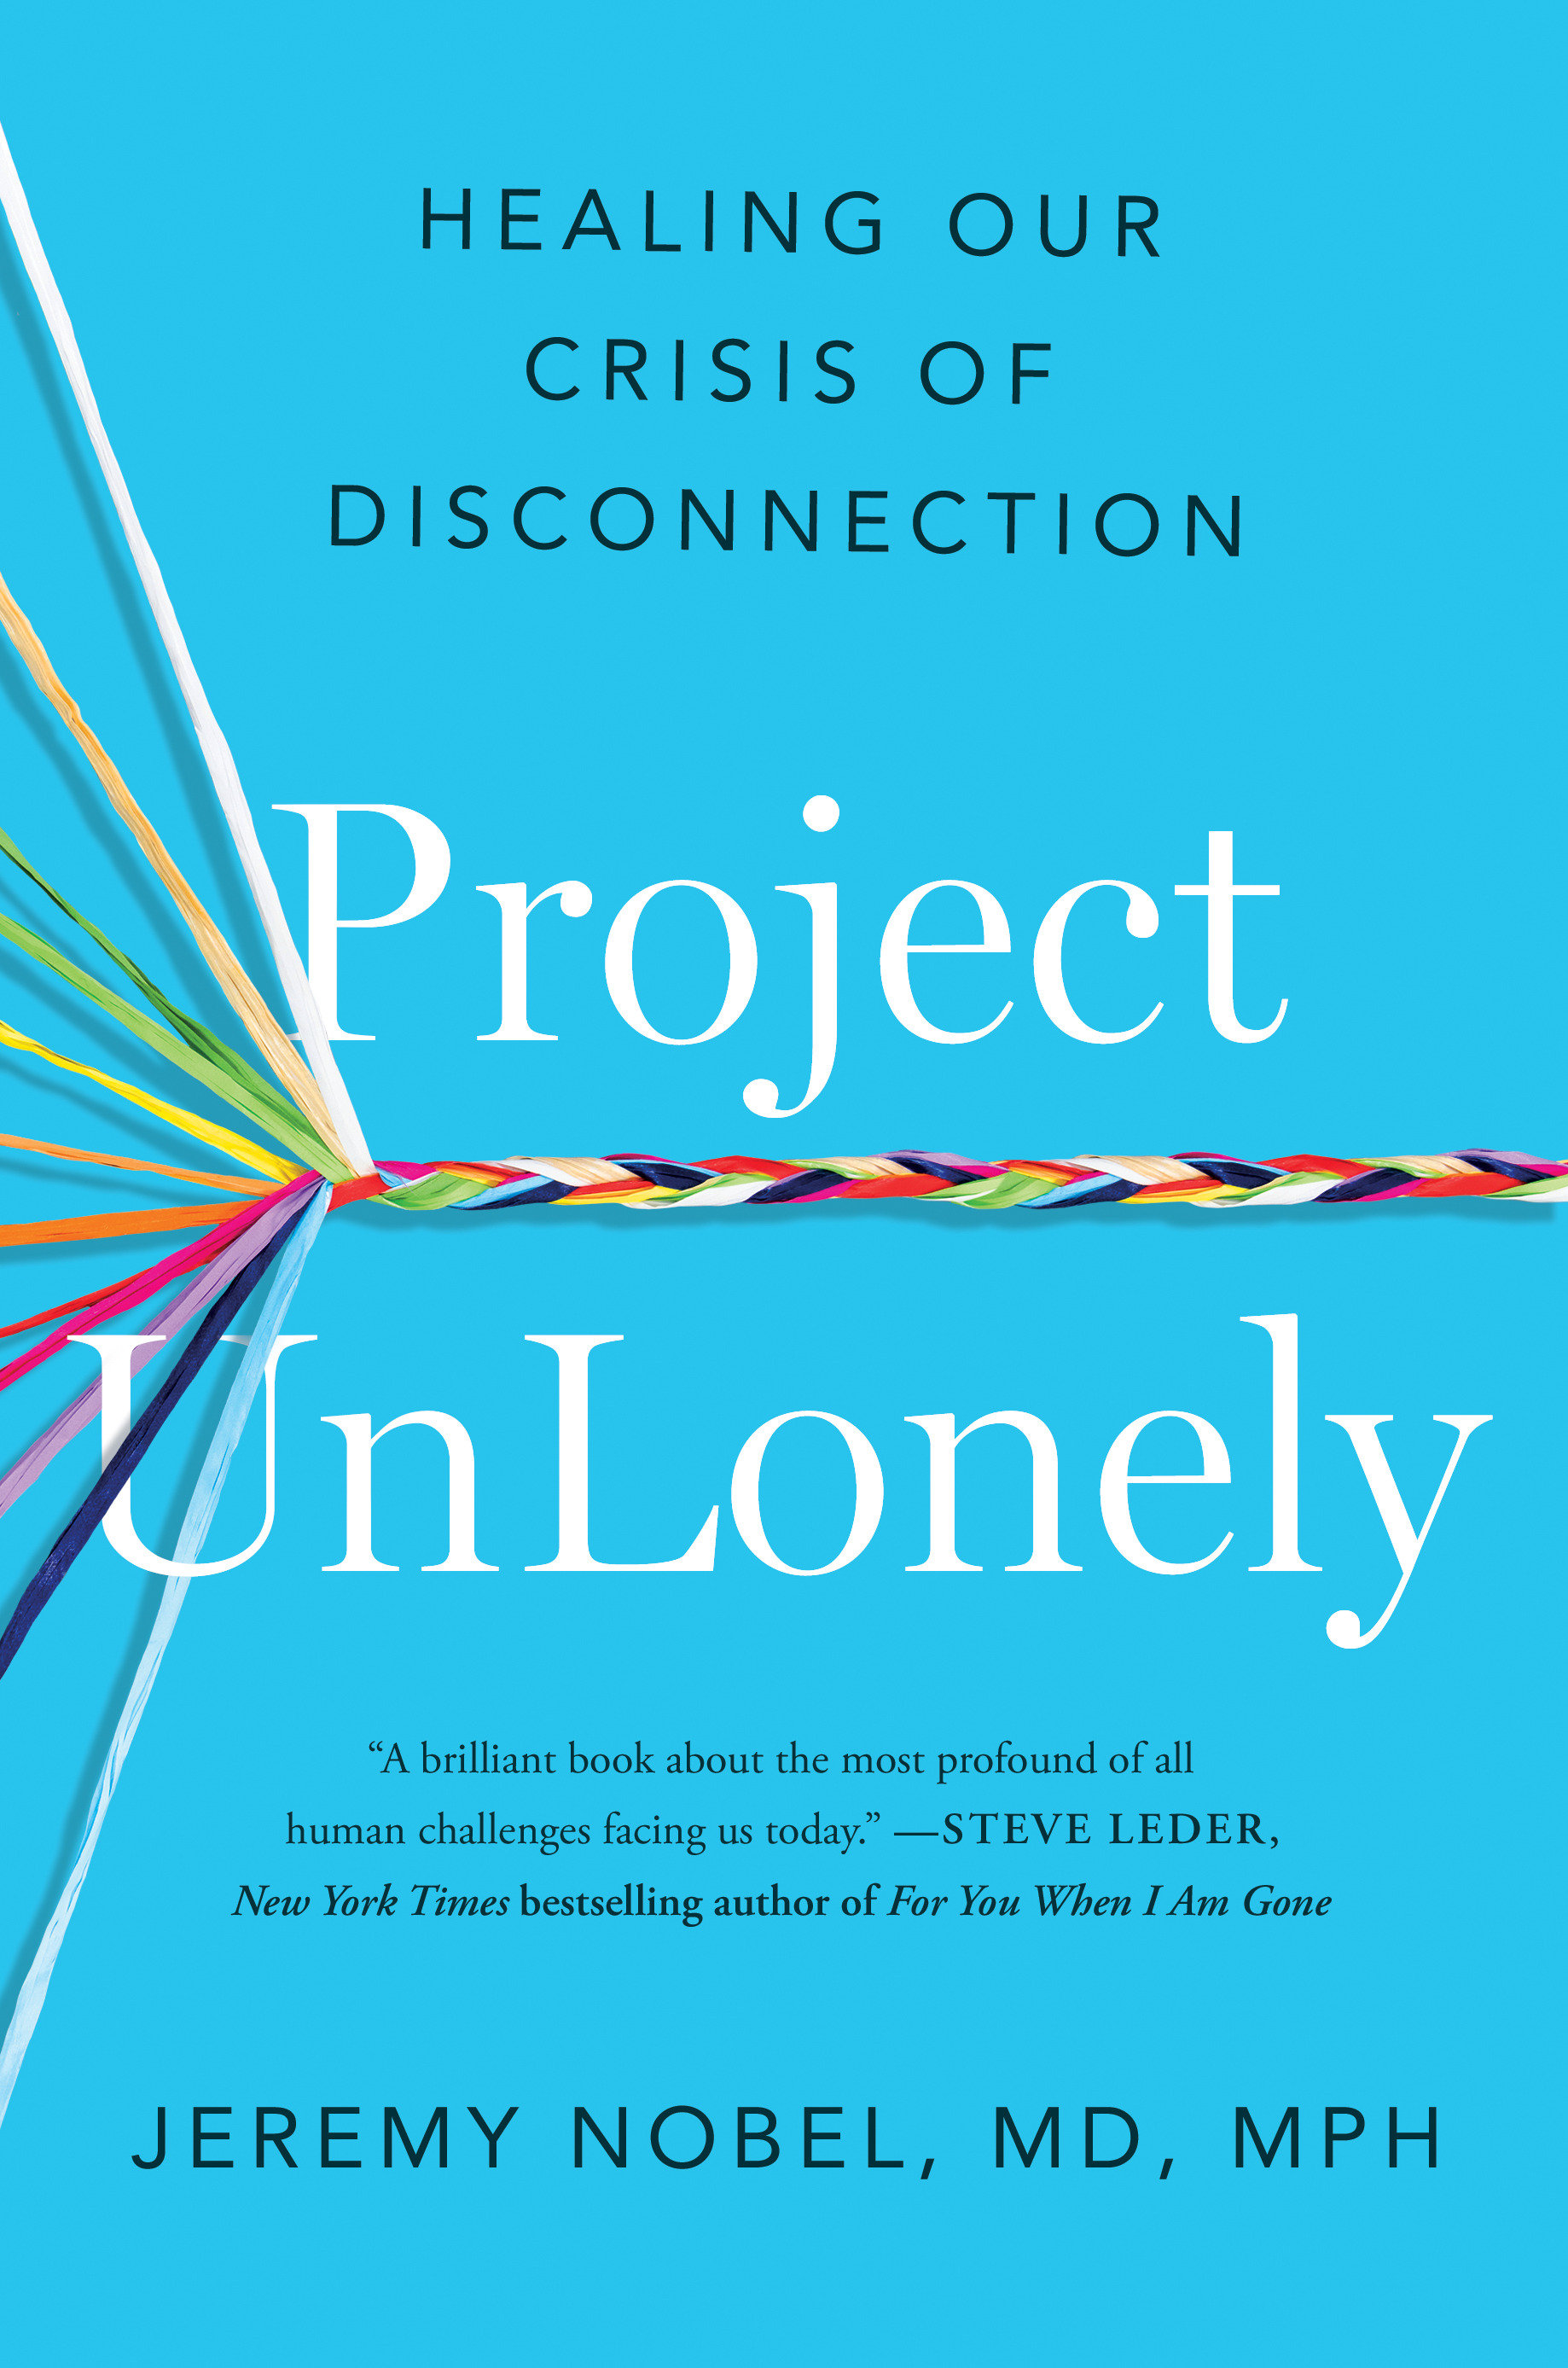 Project UnLonely Healing Our Crisis of Disconnection cover image